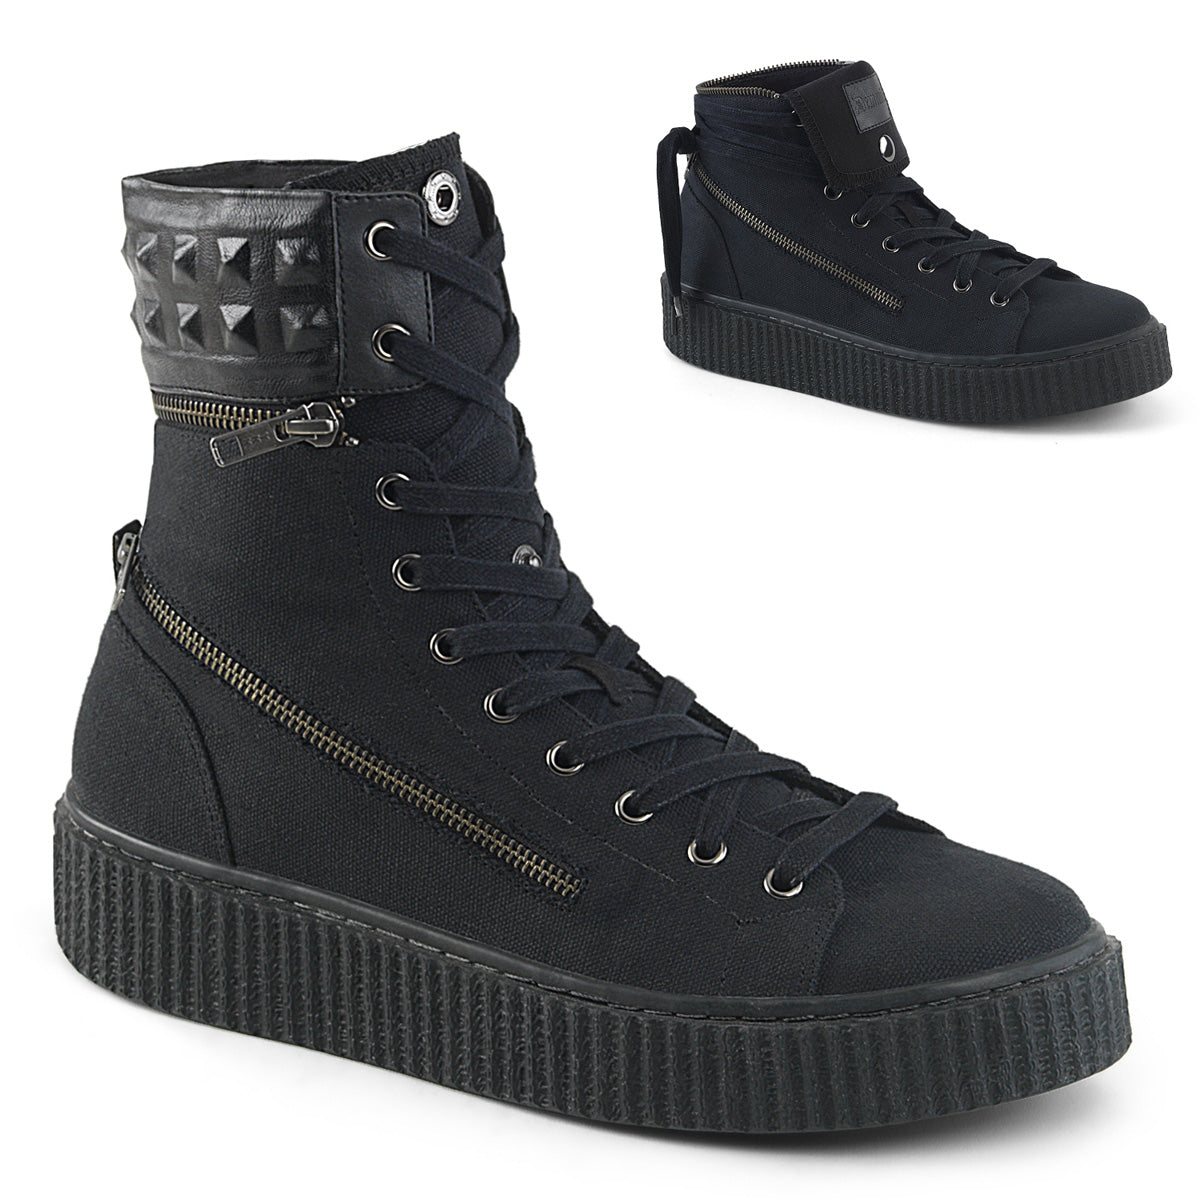 DemoniaCult Mens Ankle Boots SNEEKER-270 Blk Canvas